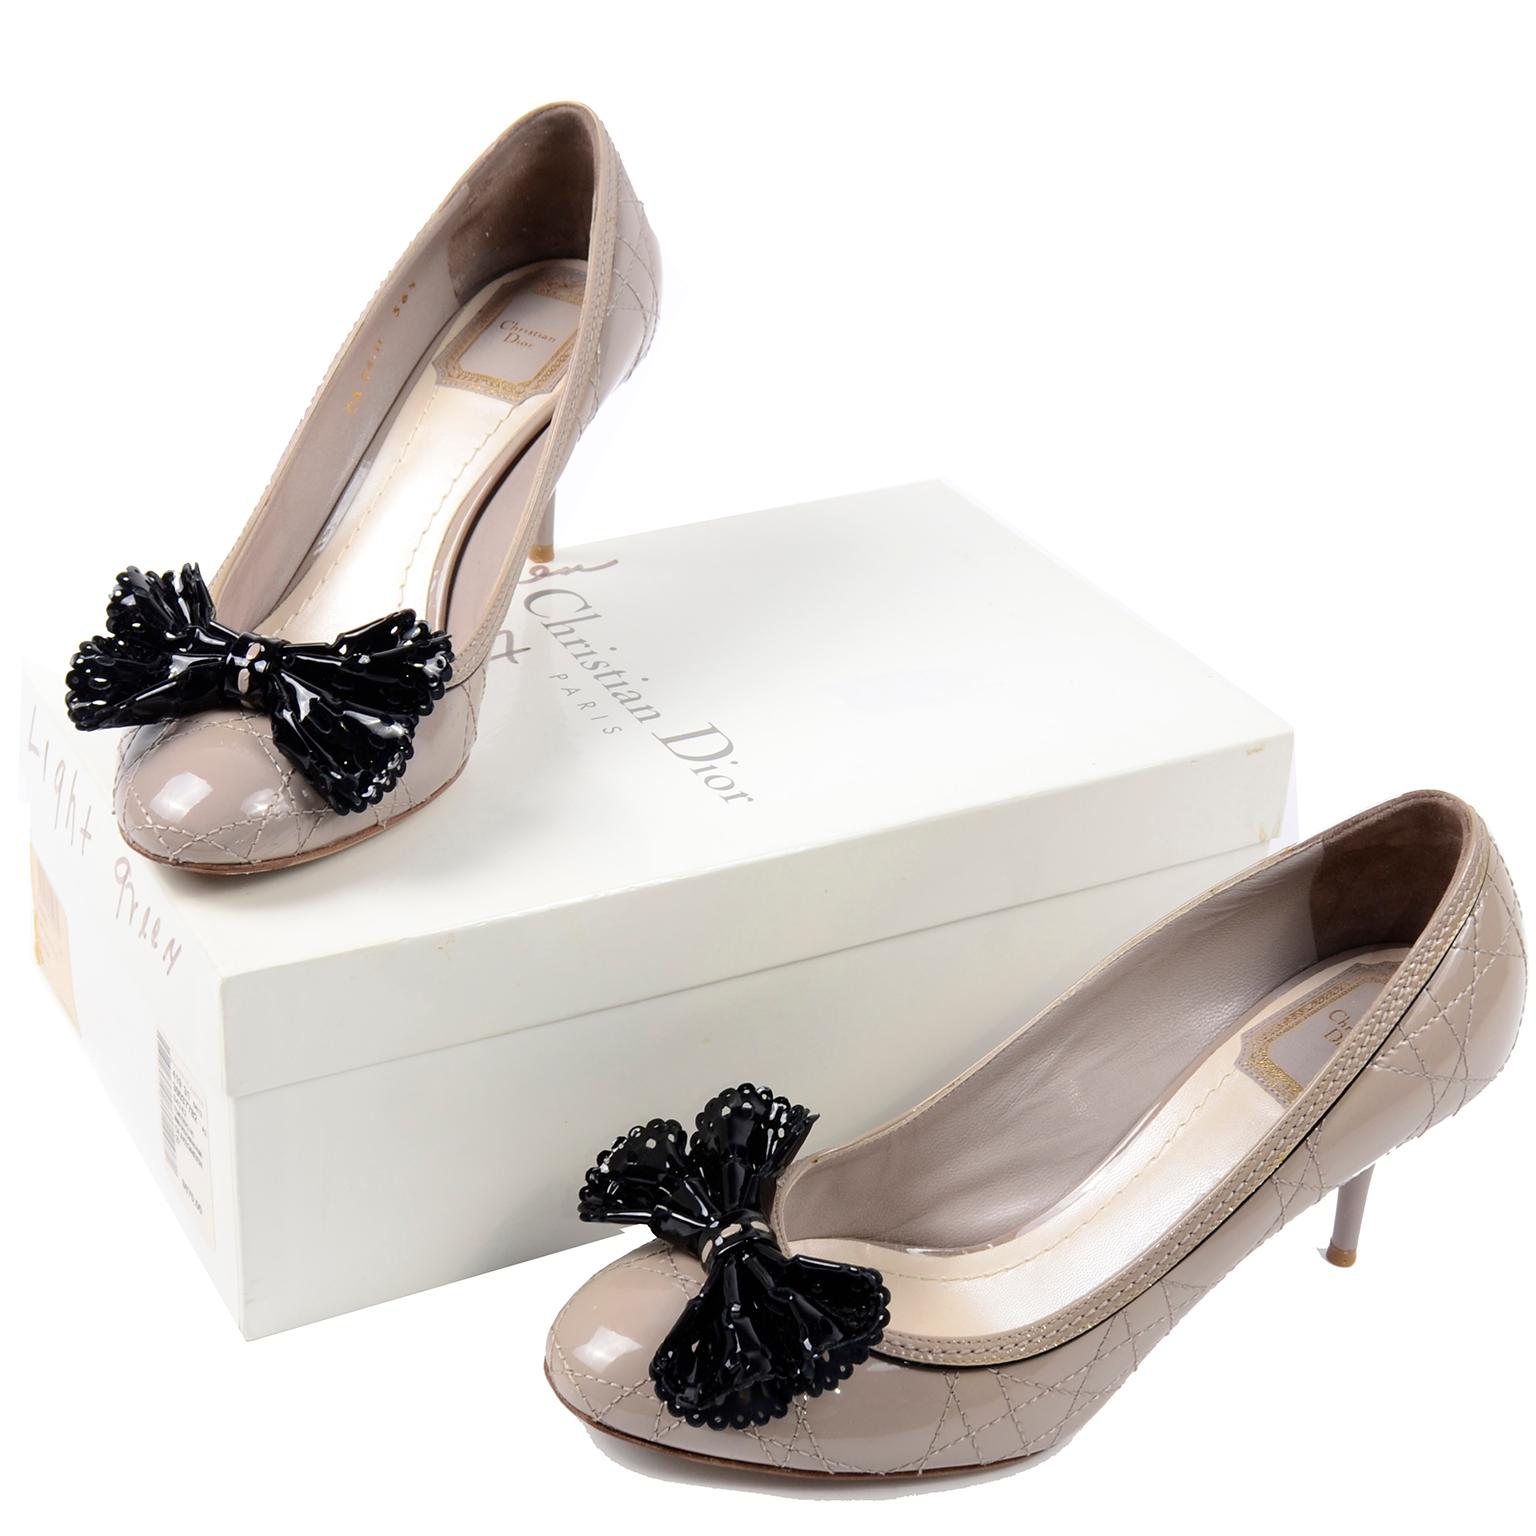 These are such pretty Christian Dior pumps with 3